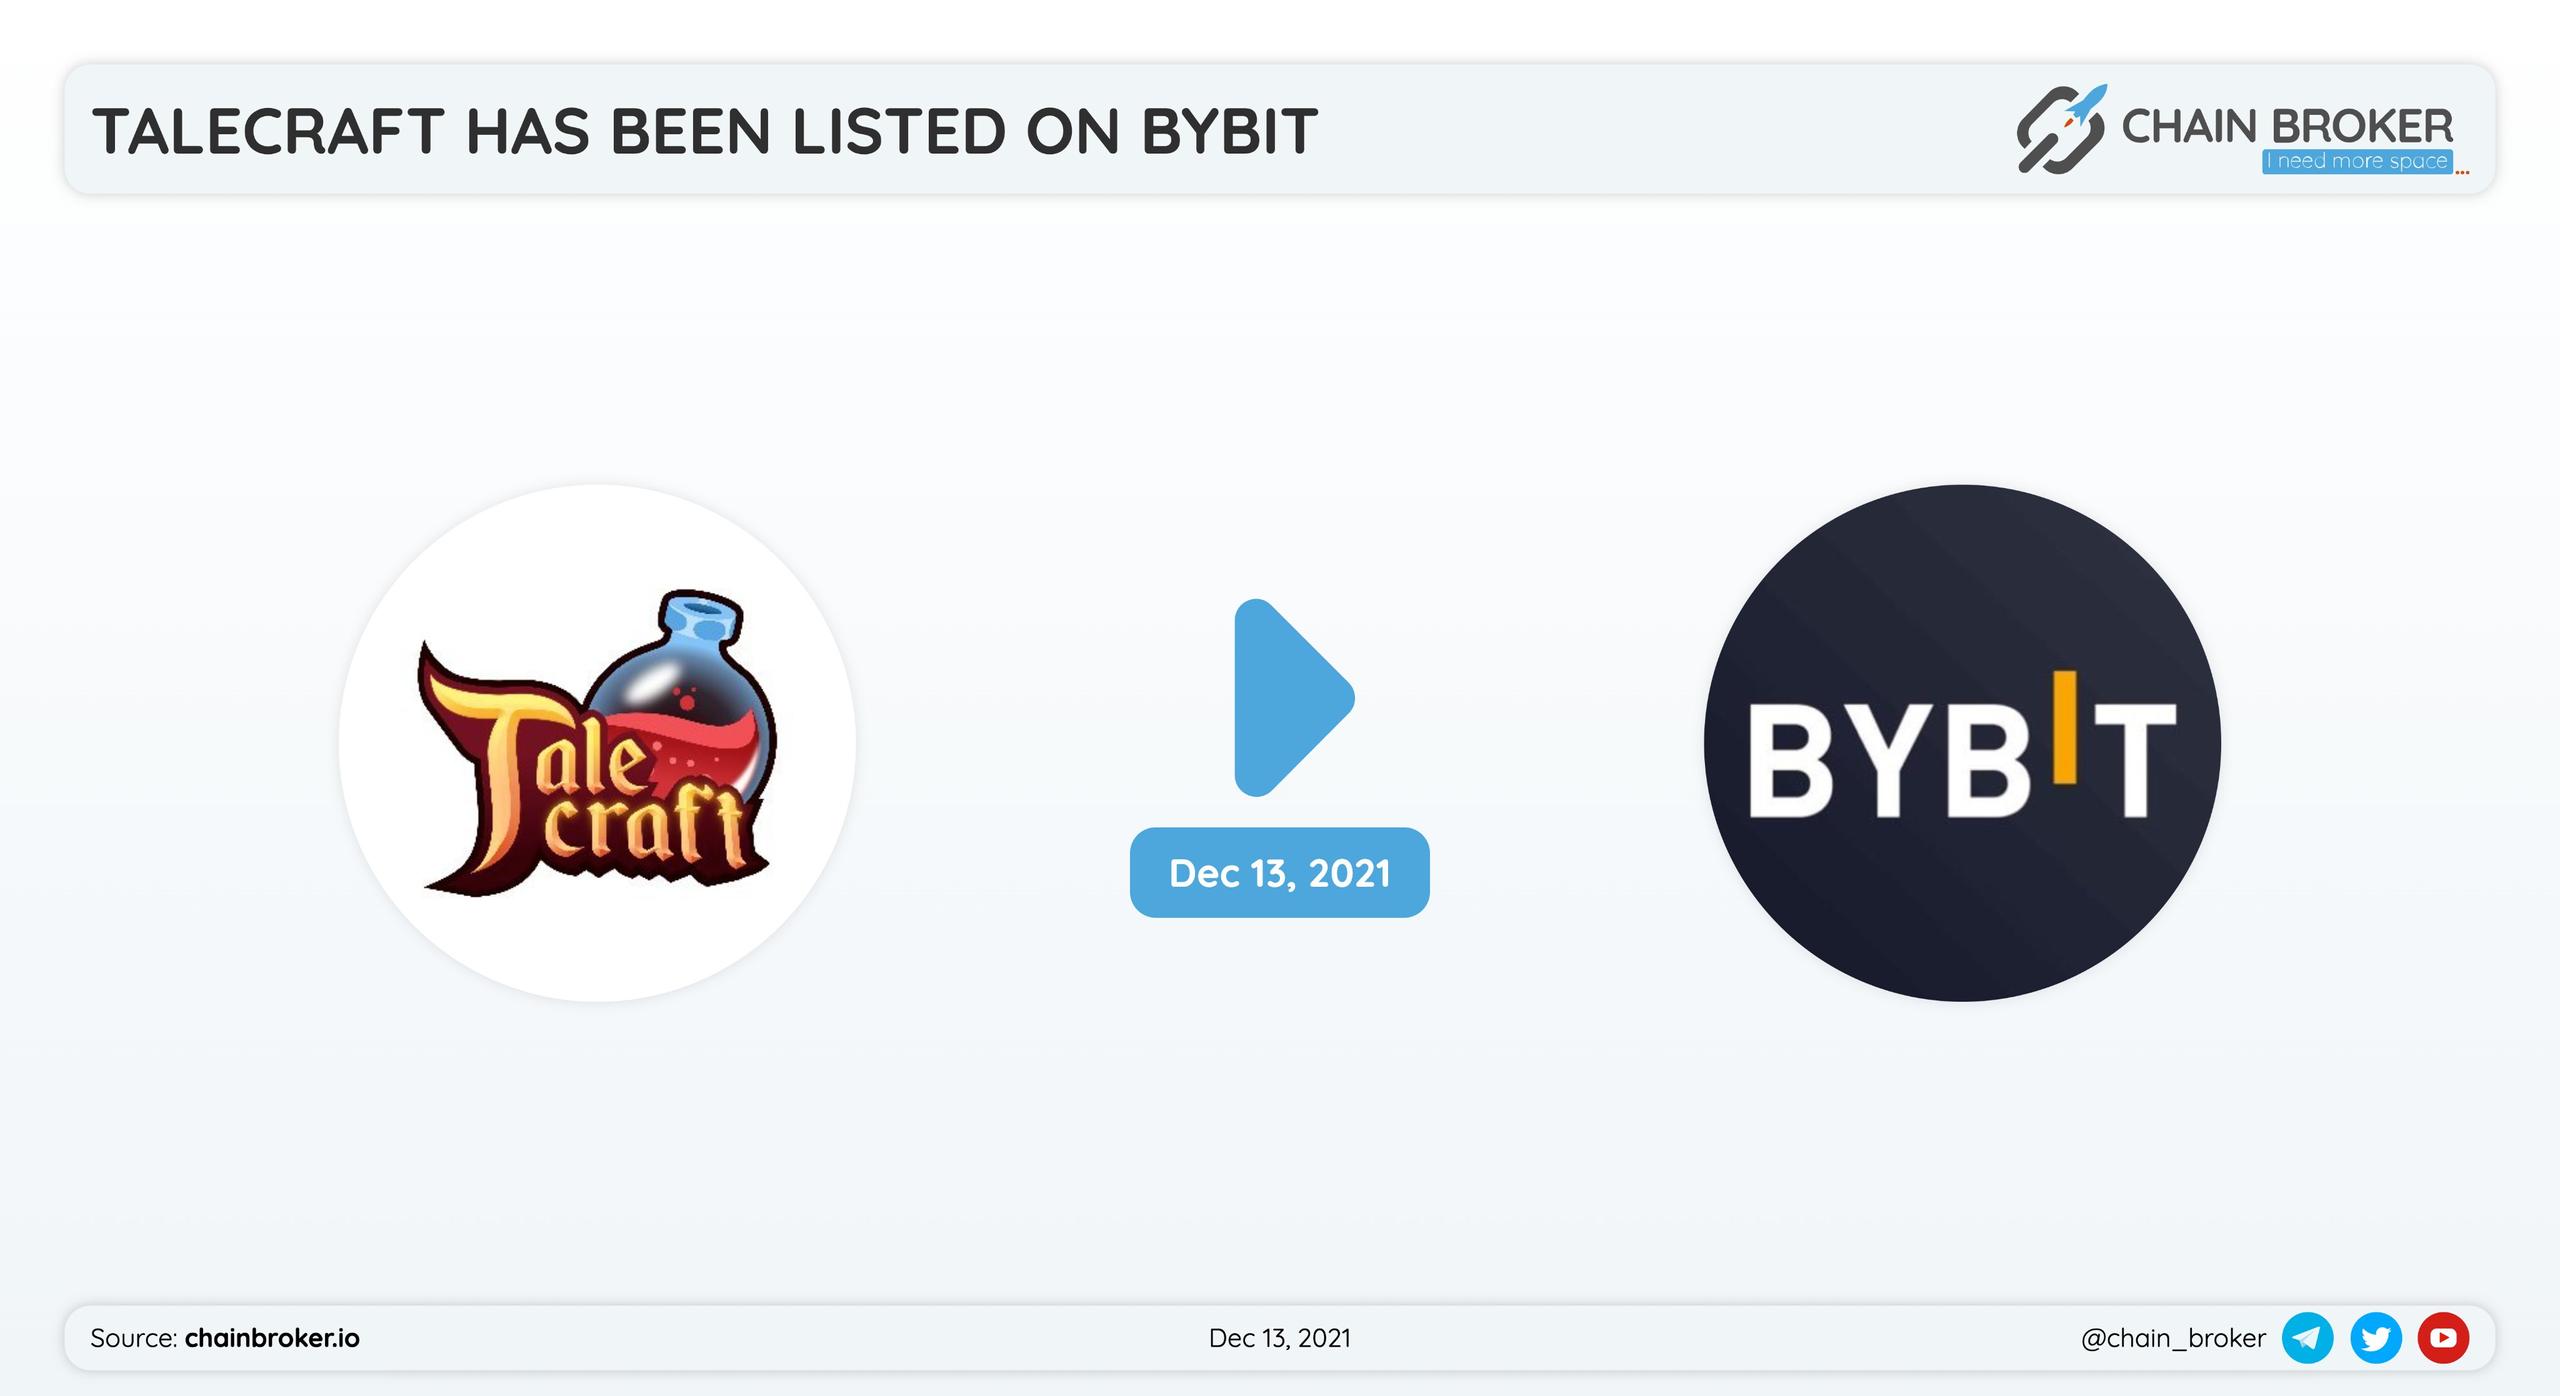 Talecraft has partnered with Bybit for a token listing